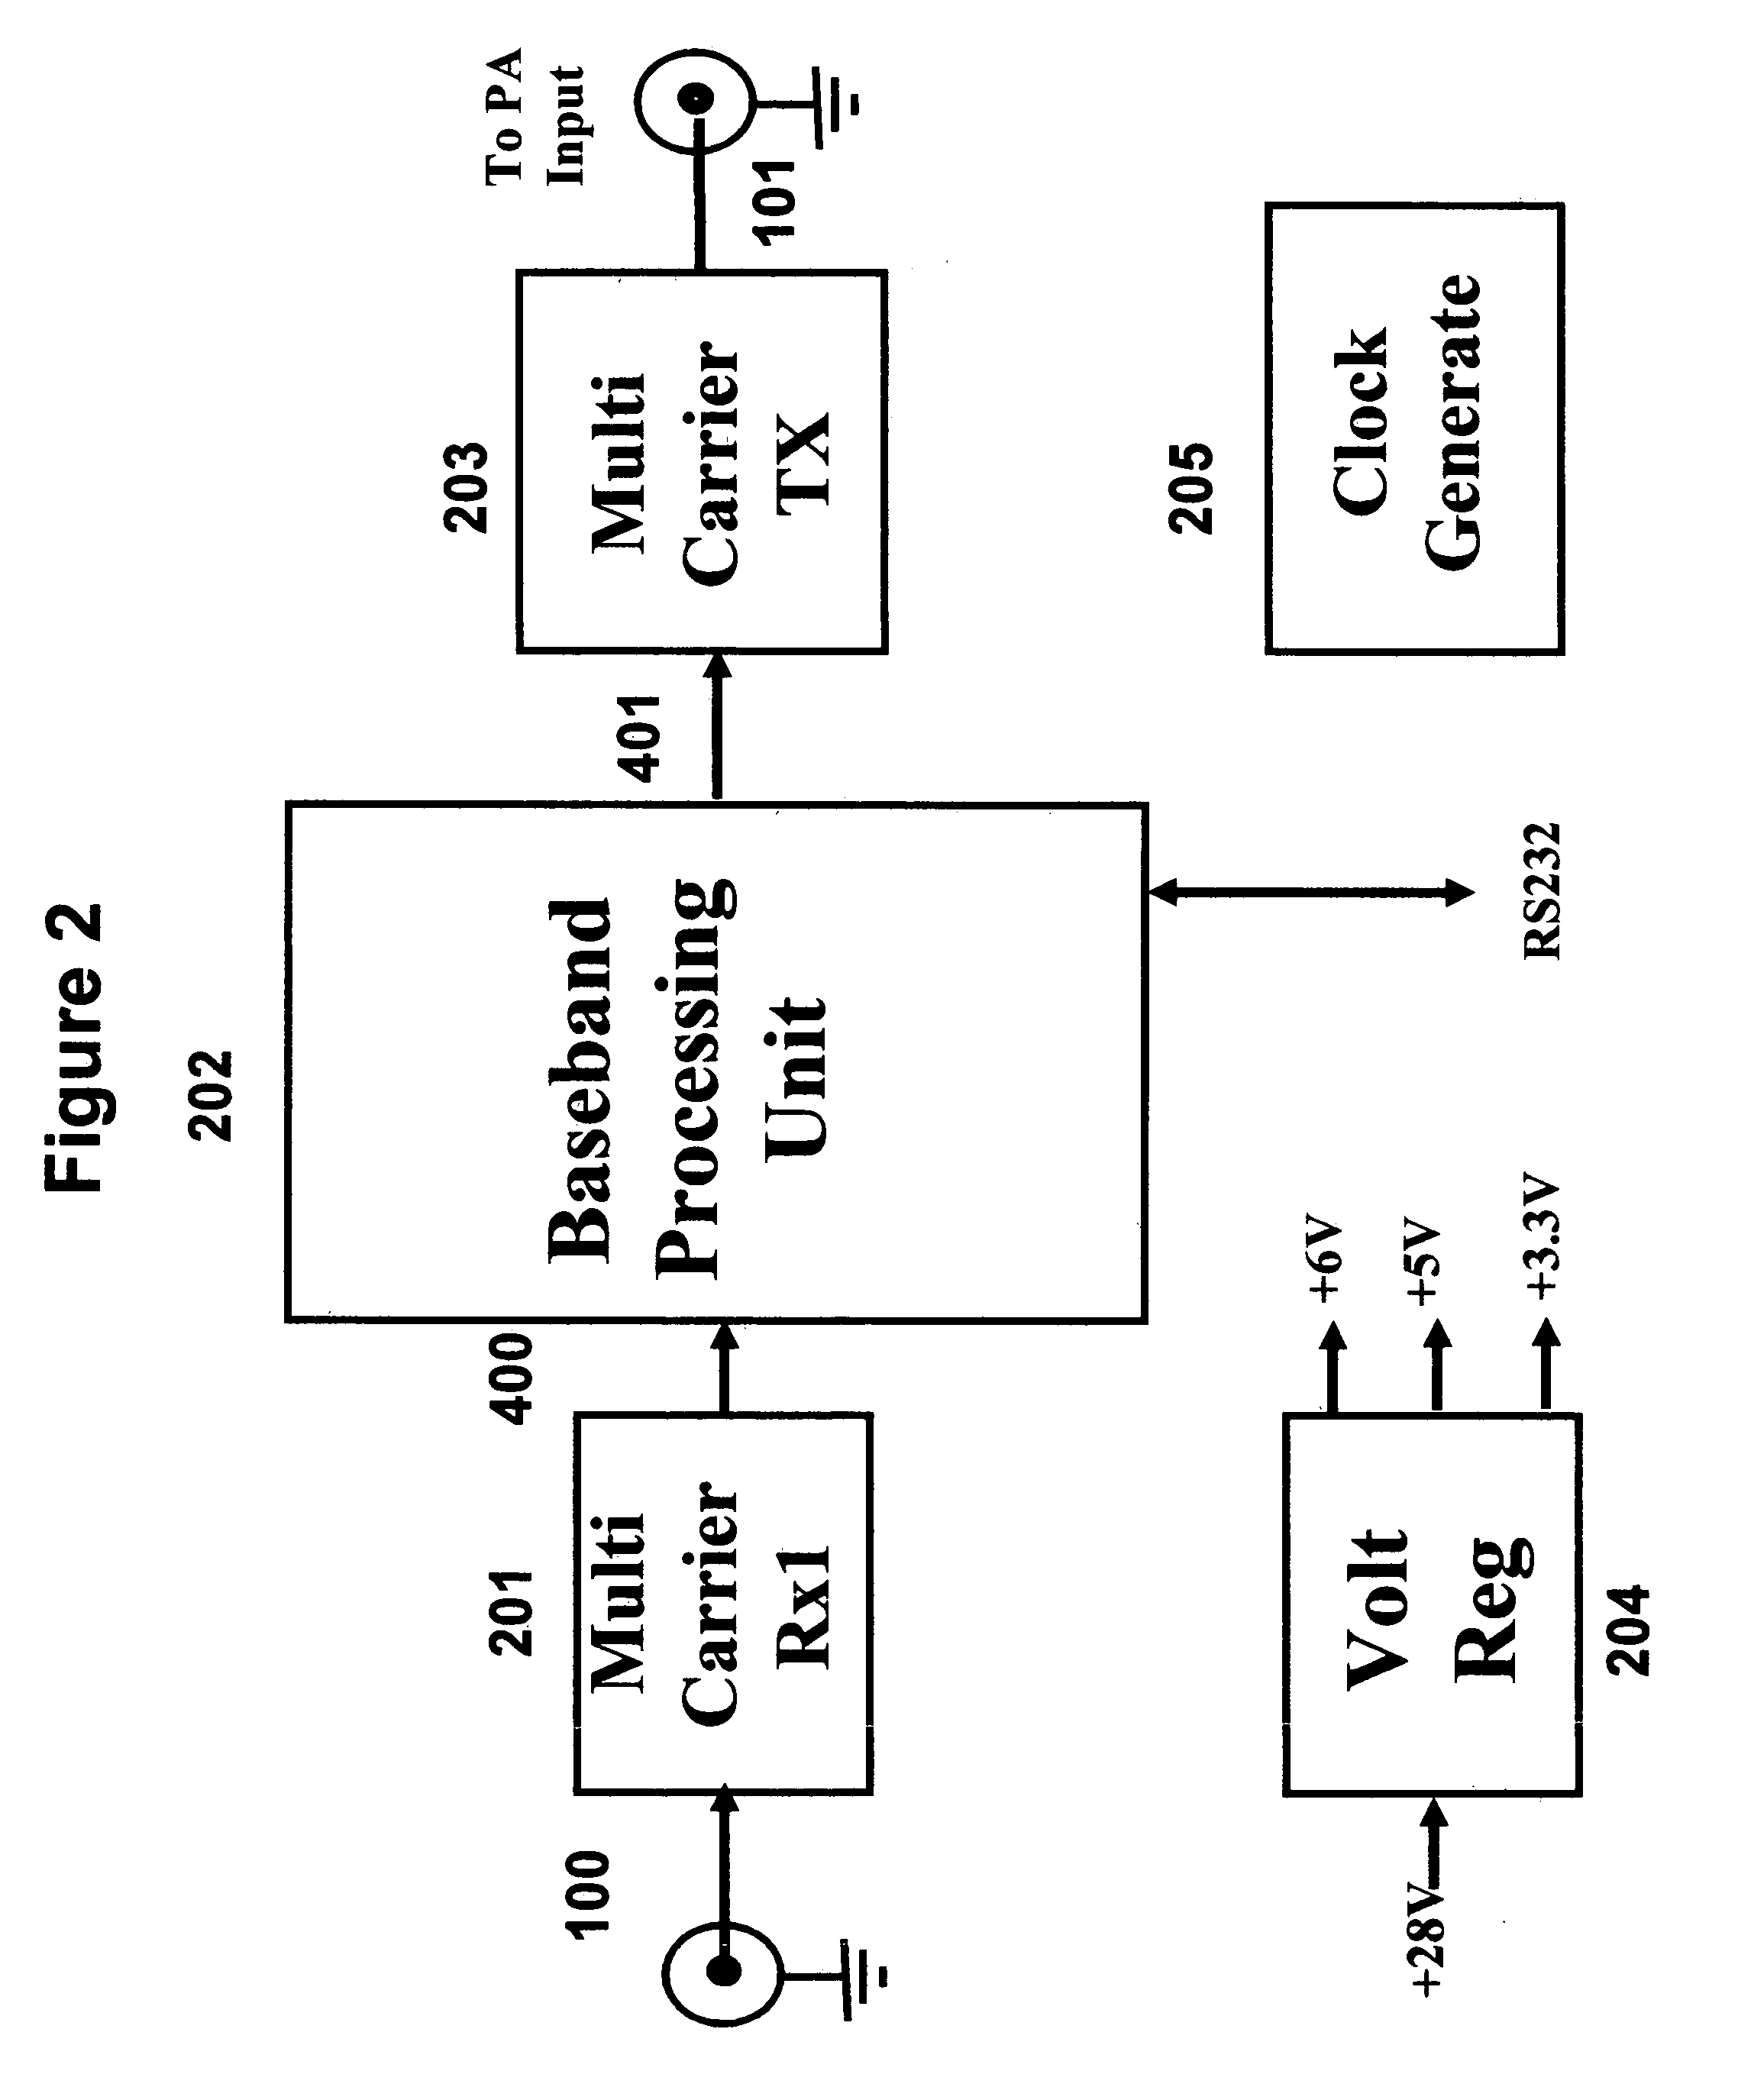 Peak-to-average reduction technique for multi-carrier power amplifiers